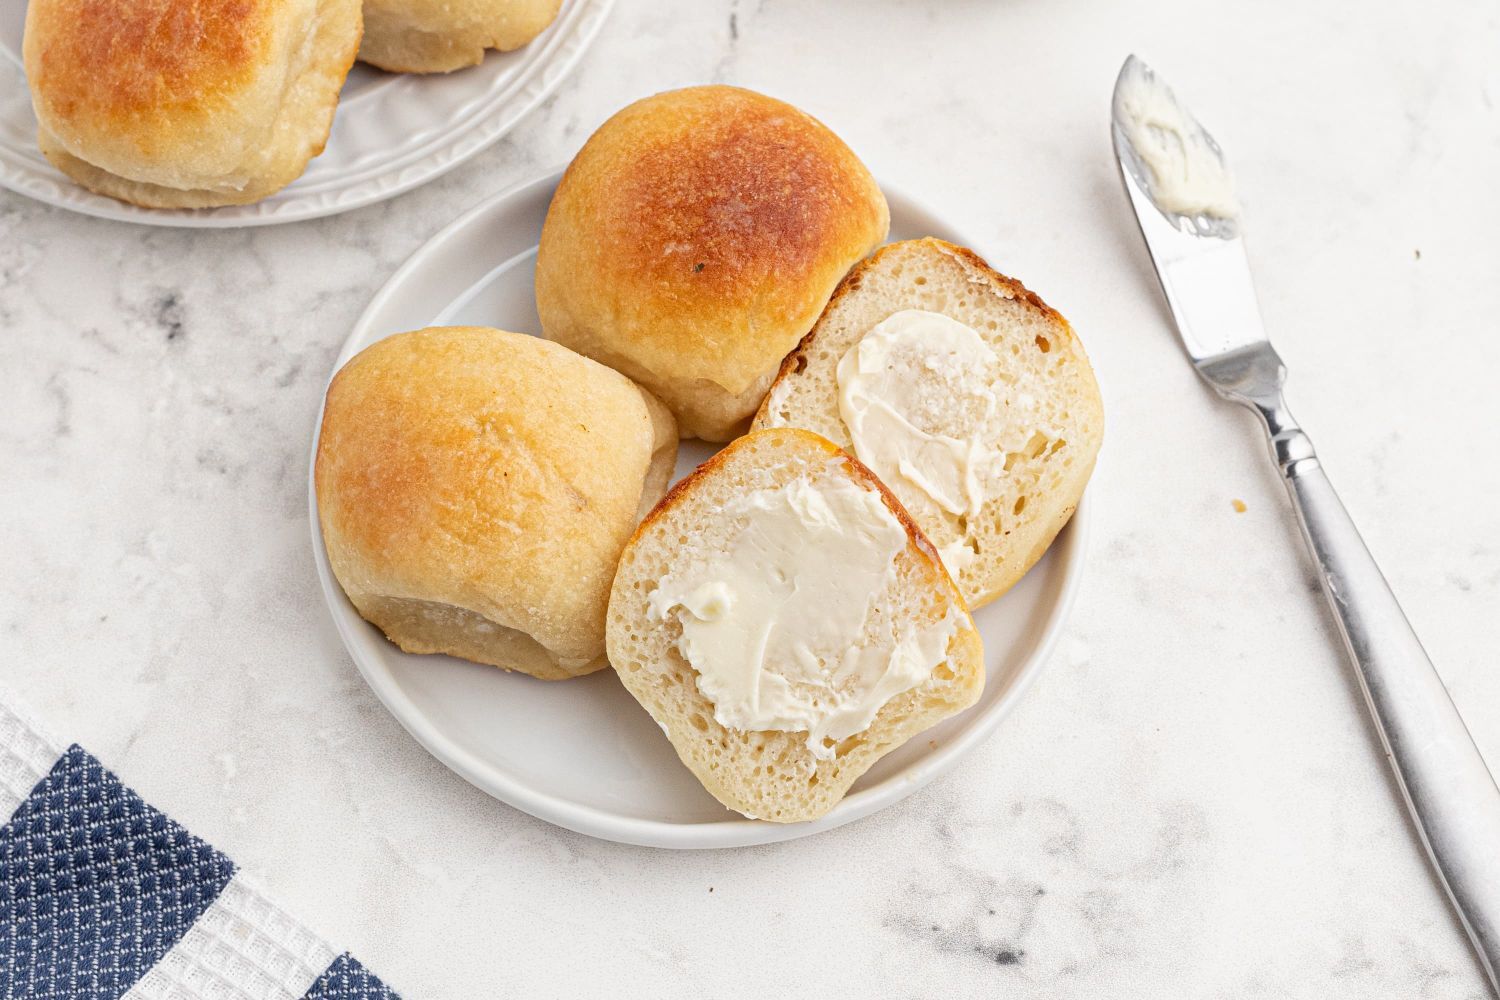 Easy dinner rolls made with two ingredient dough and served sliced in half with butter.